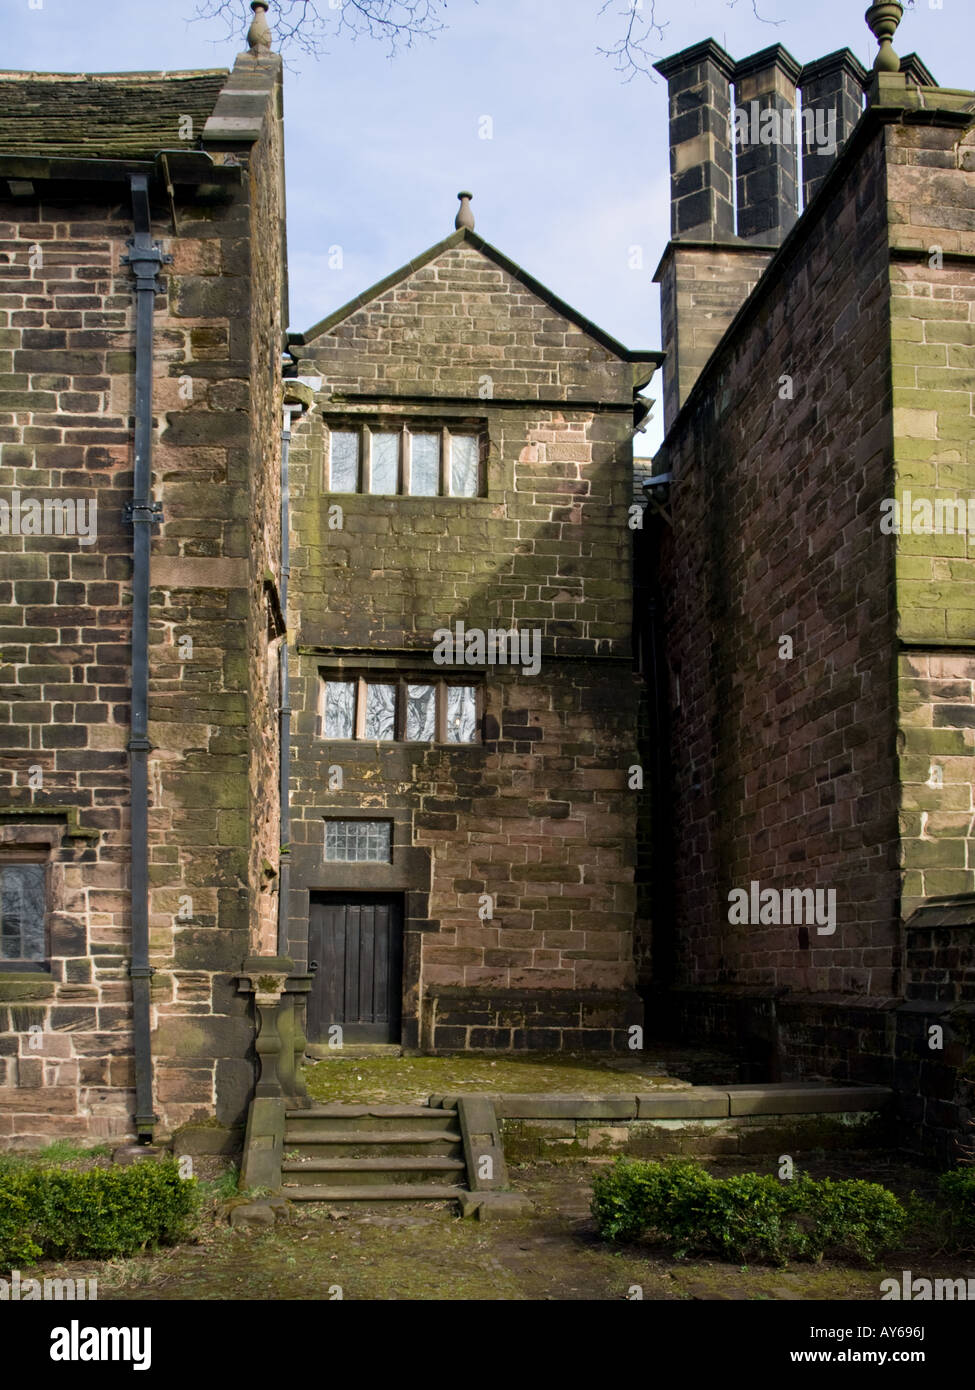 Hall i'th Wood, Bolton, Lancashire, the side of the building Stock Photo